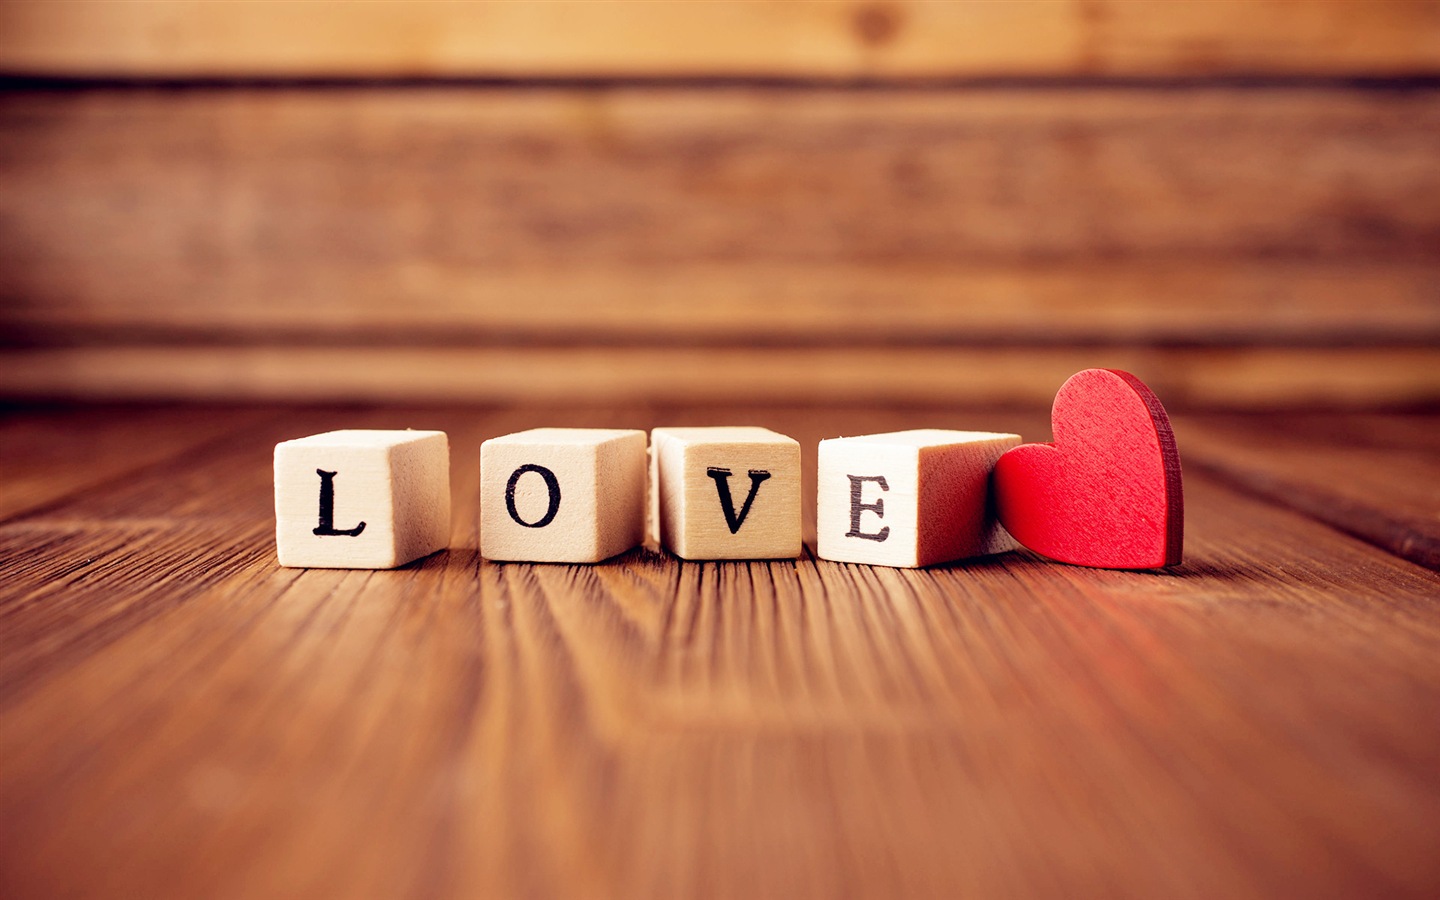 The theme of love, creative heart-shaped HD wallpapers #2 - 1440x900